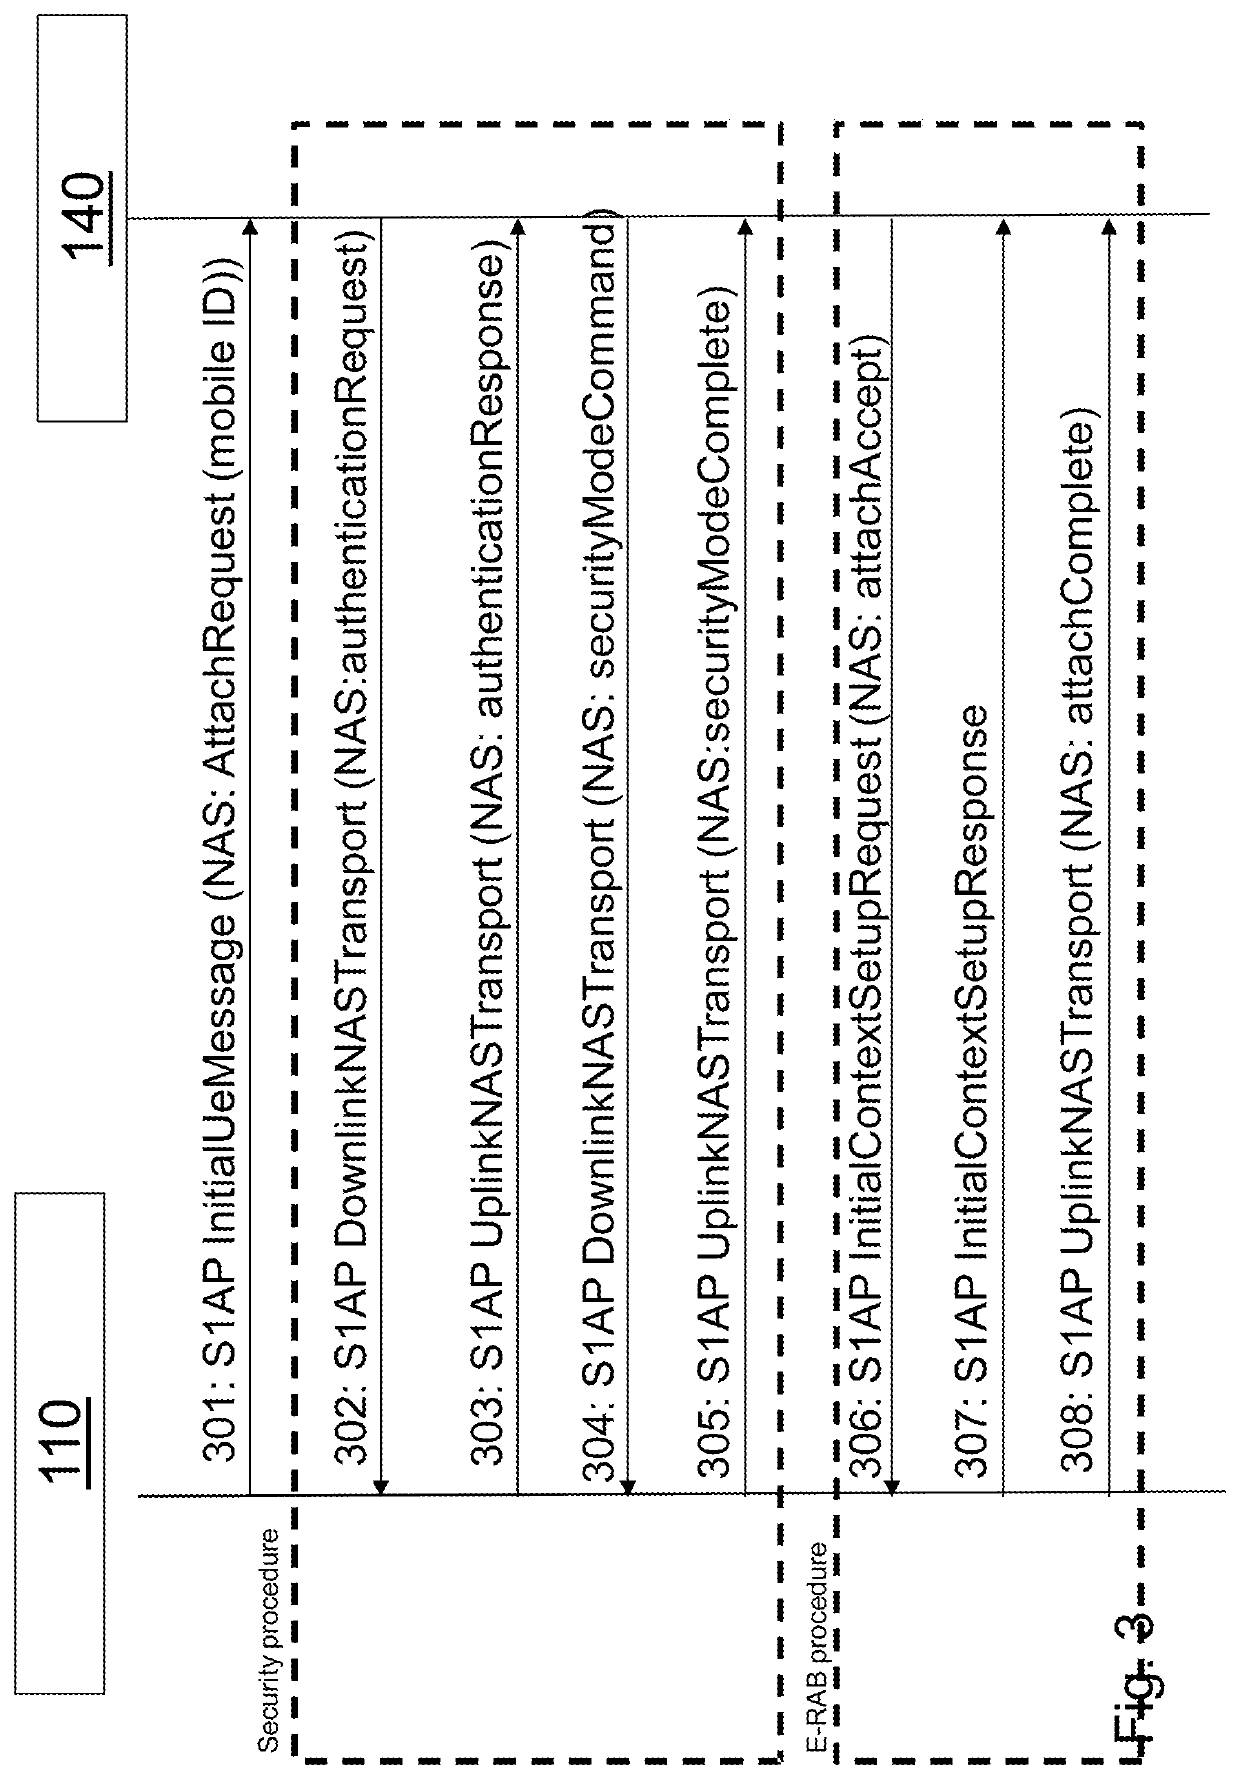 Method for performing continuous deployment and feedback from a radio network node